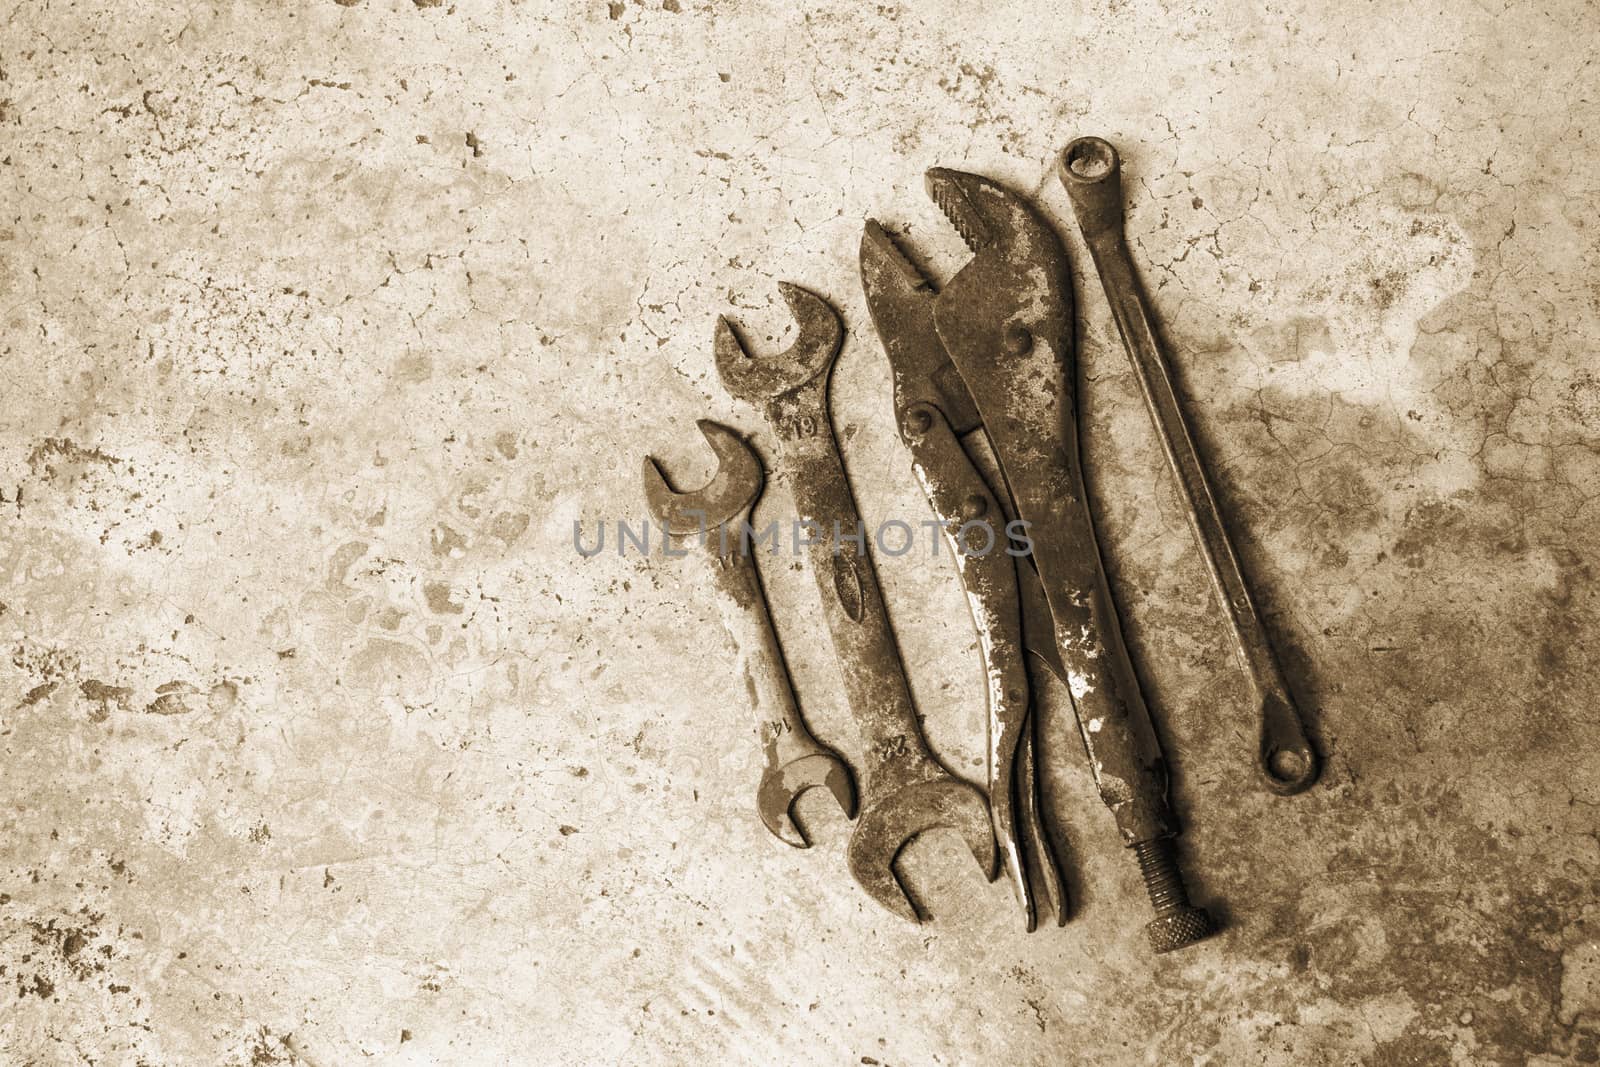 The old rusty tools supplies put on the ground sepia style by kirisa99